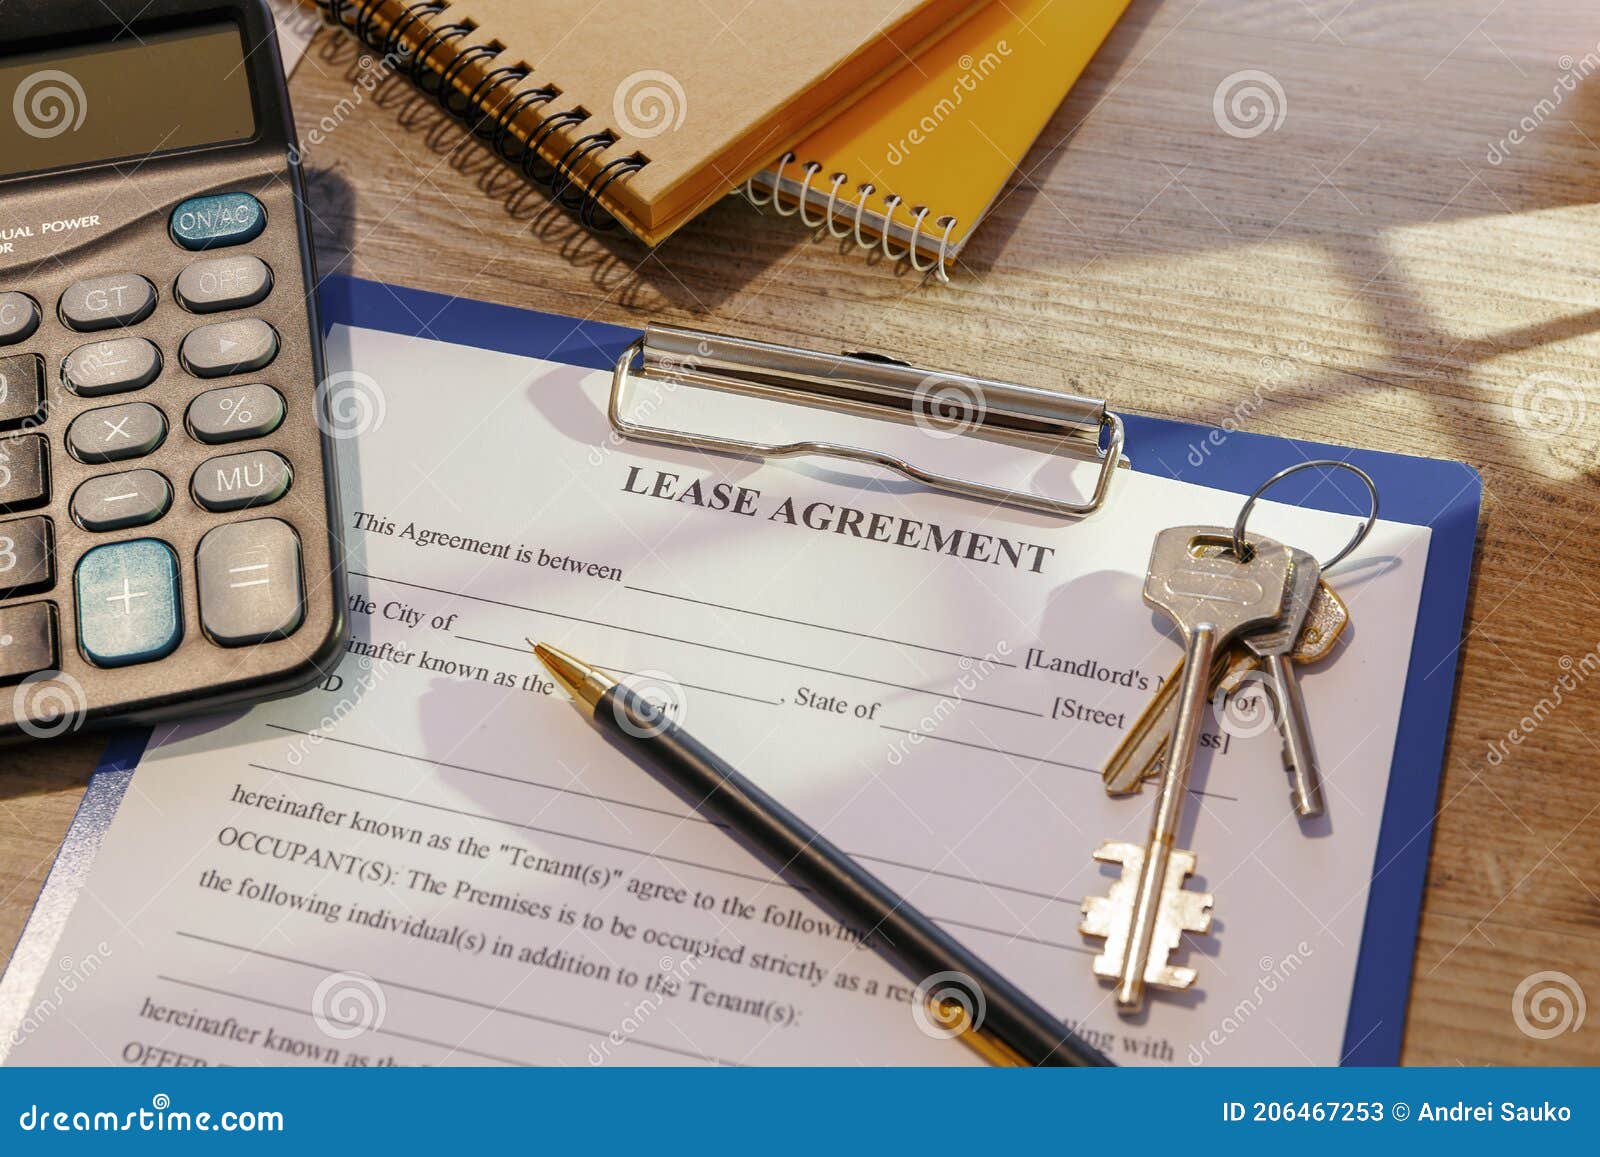 blank real estate lease agreement and keys on office desk